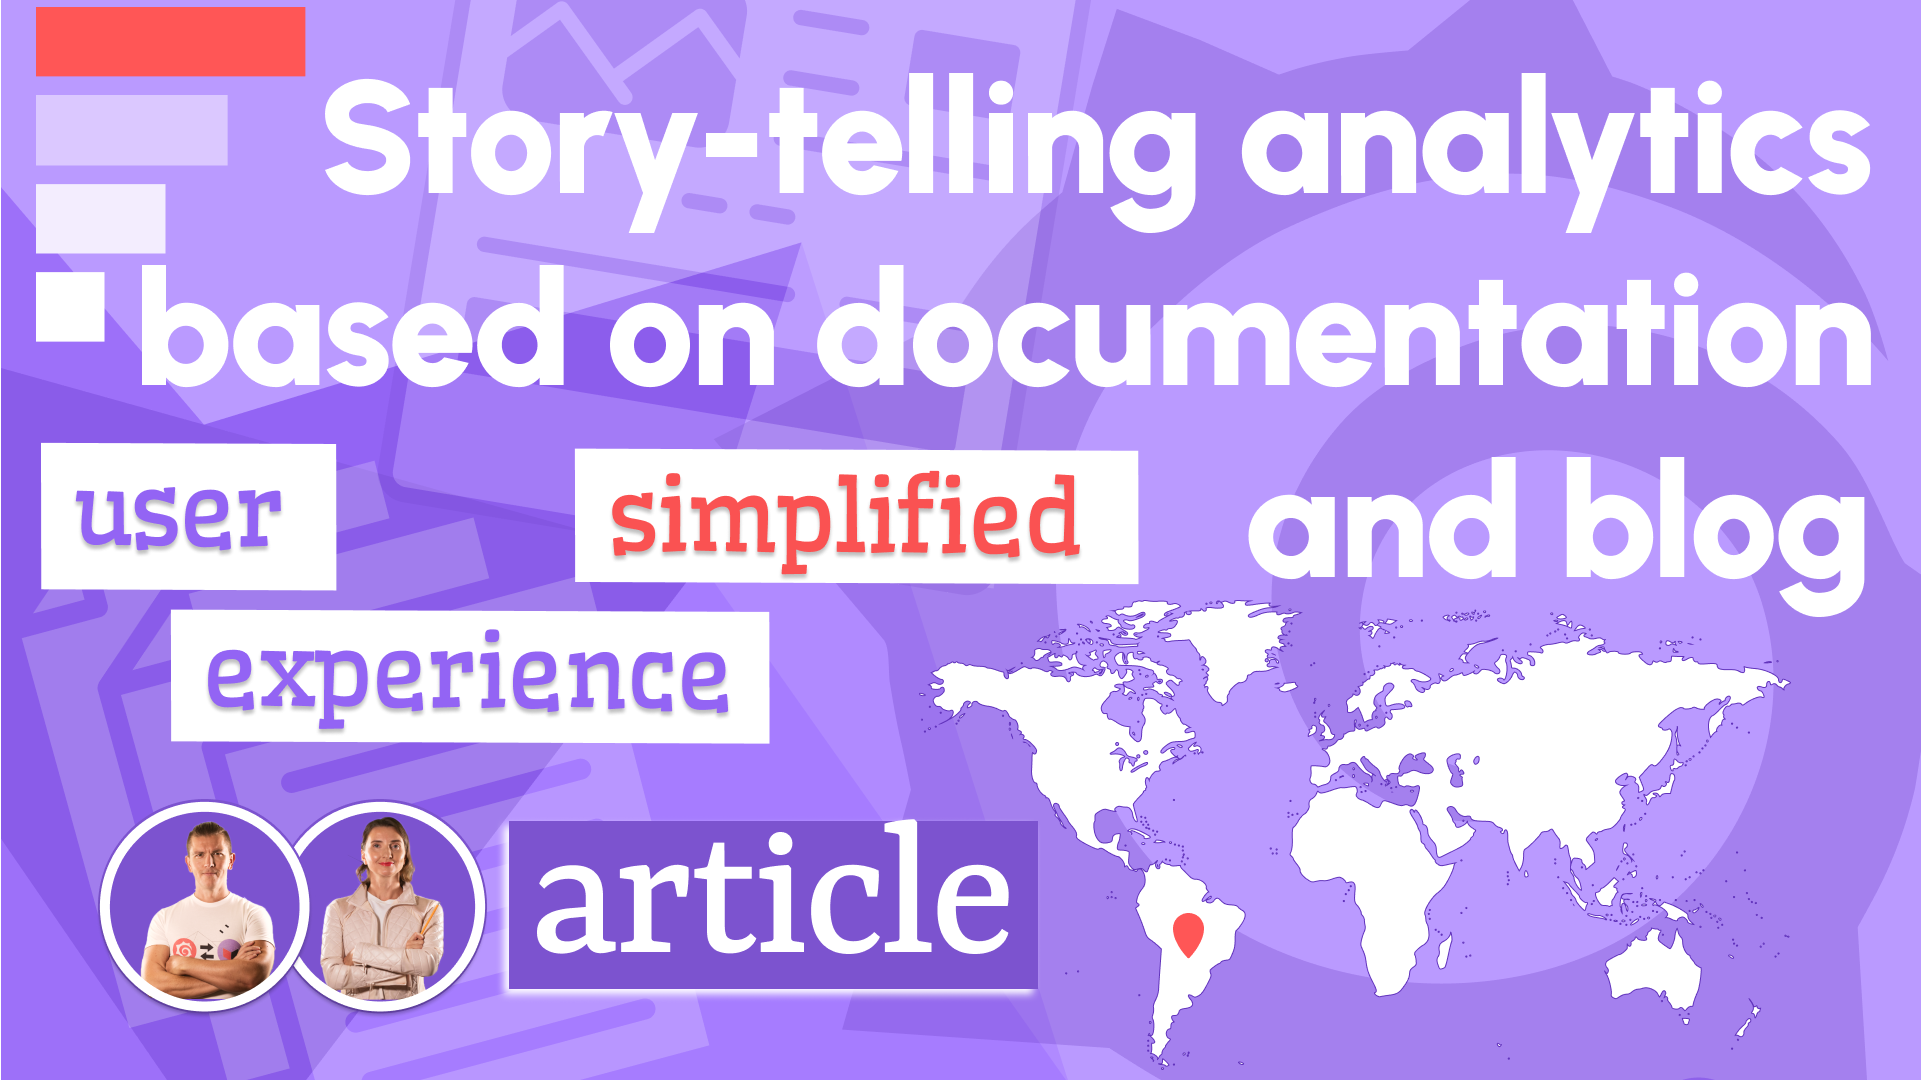 Romance of documentation and blog produced a story-telling analytics